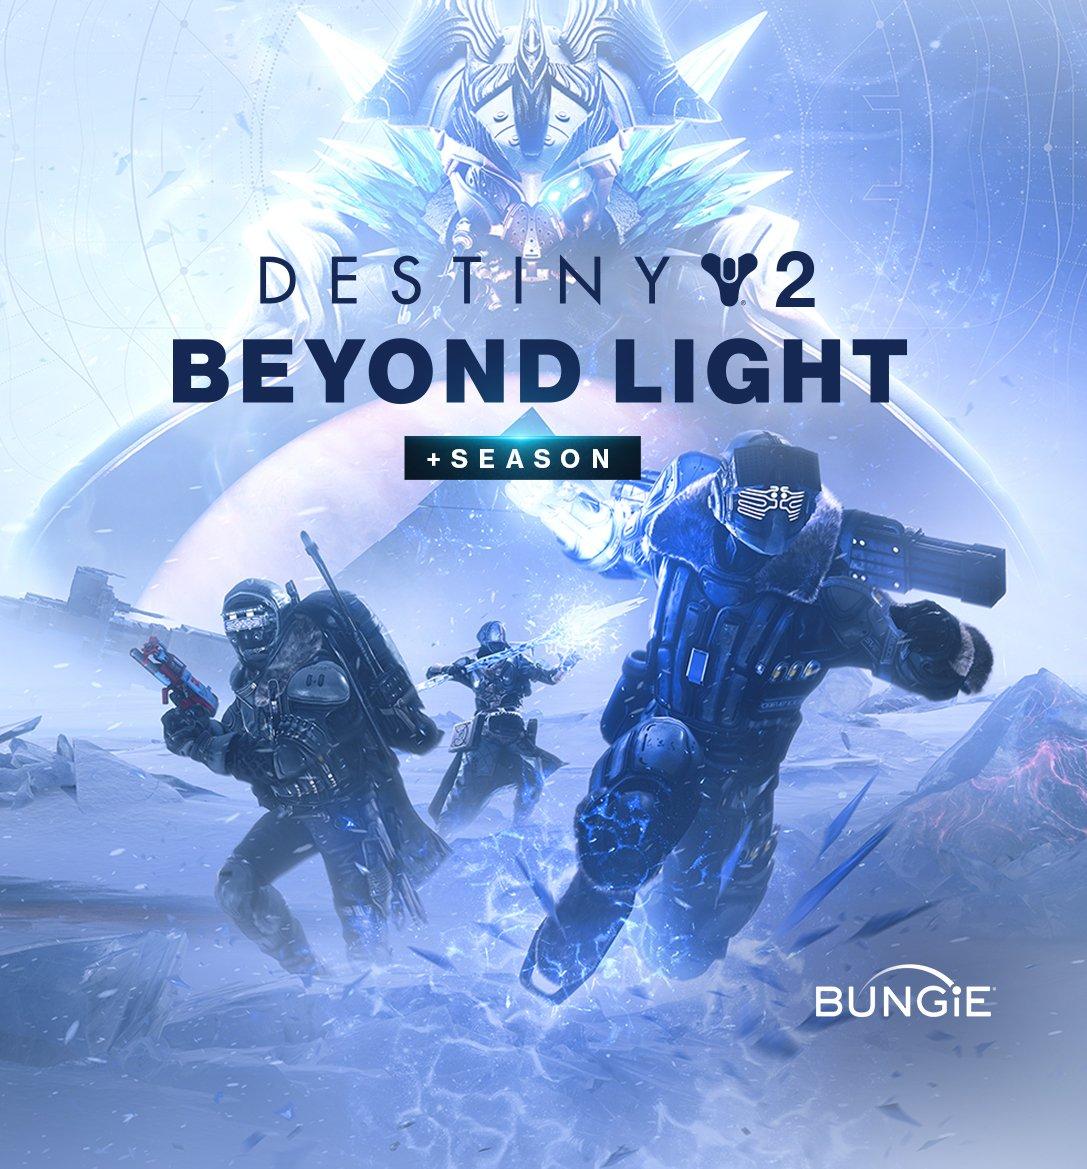 Coming Soon to Xbox Game Pass: Back 4 Blood, Destiny 2: Beyond